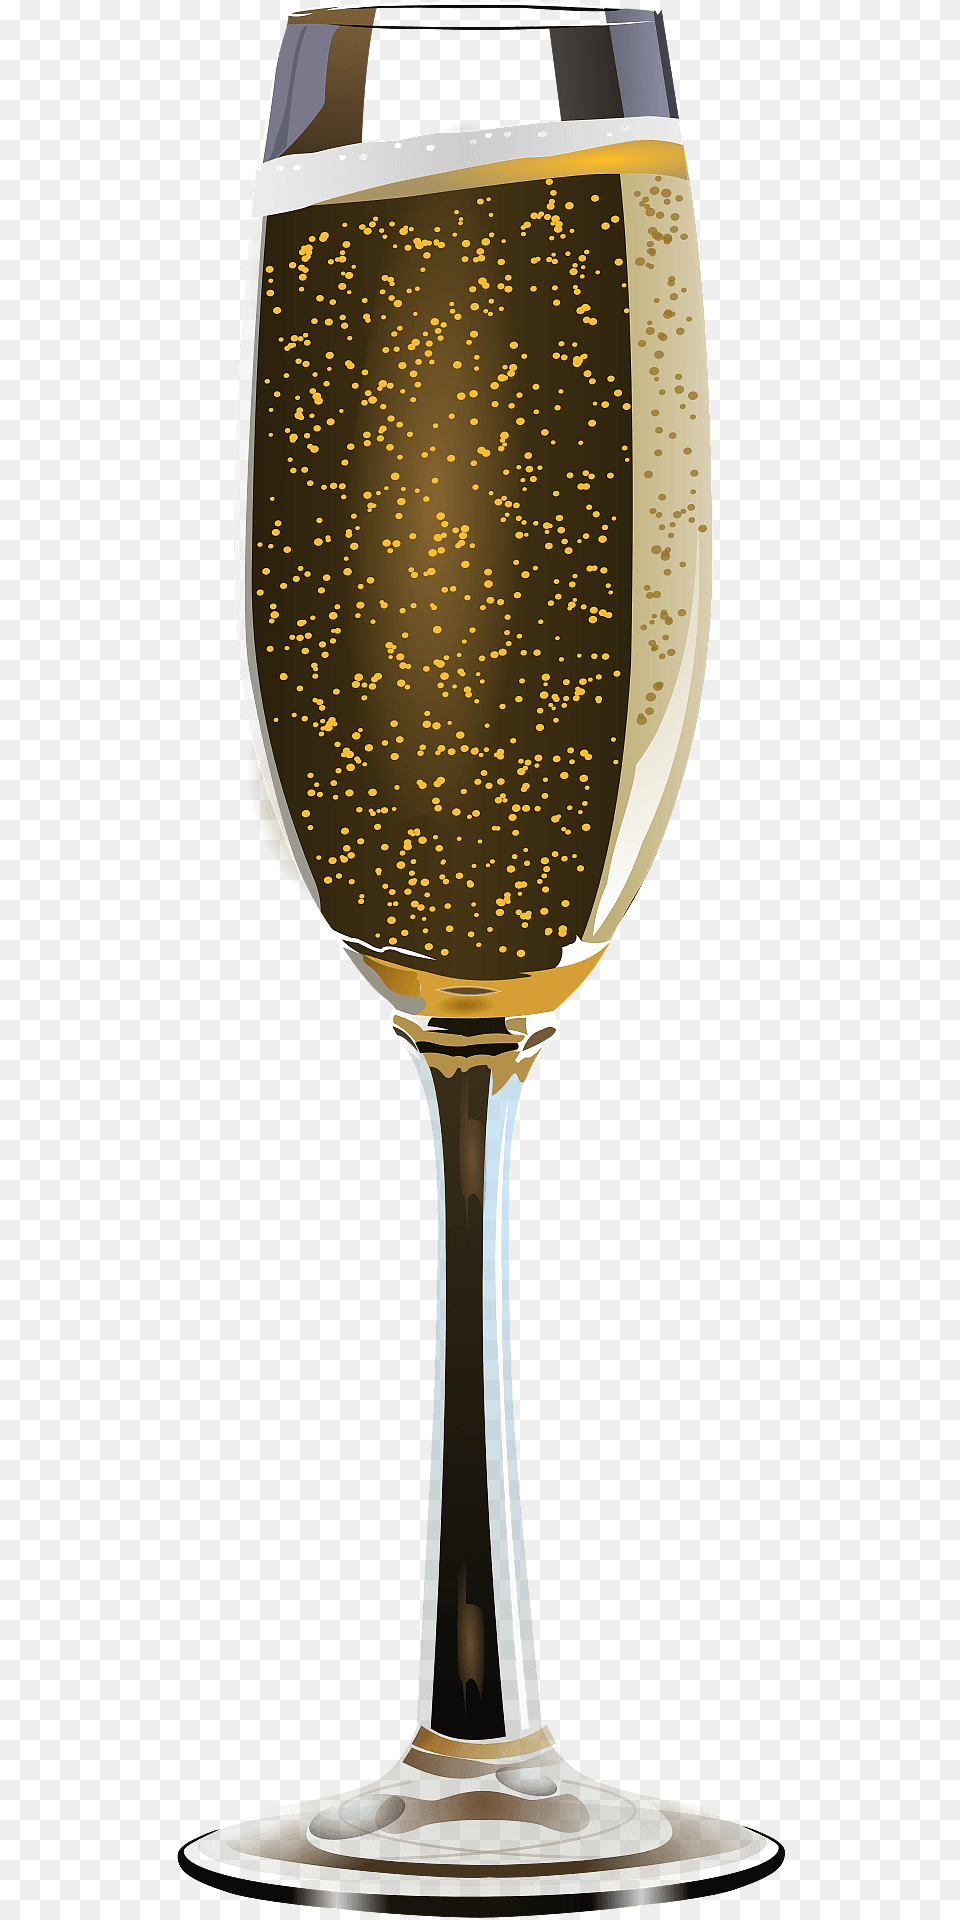 Champagne Glass Clipart, Alcohol, Beverage, Liquor, Wine Png